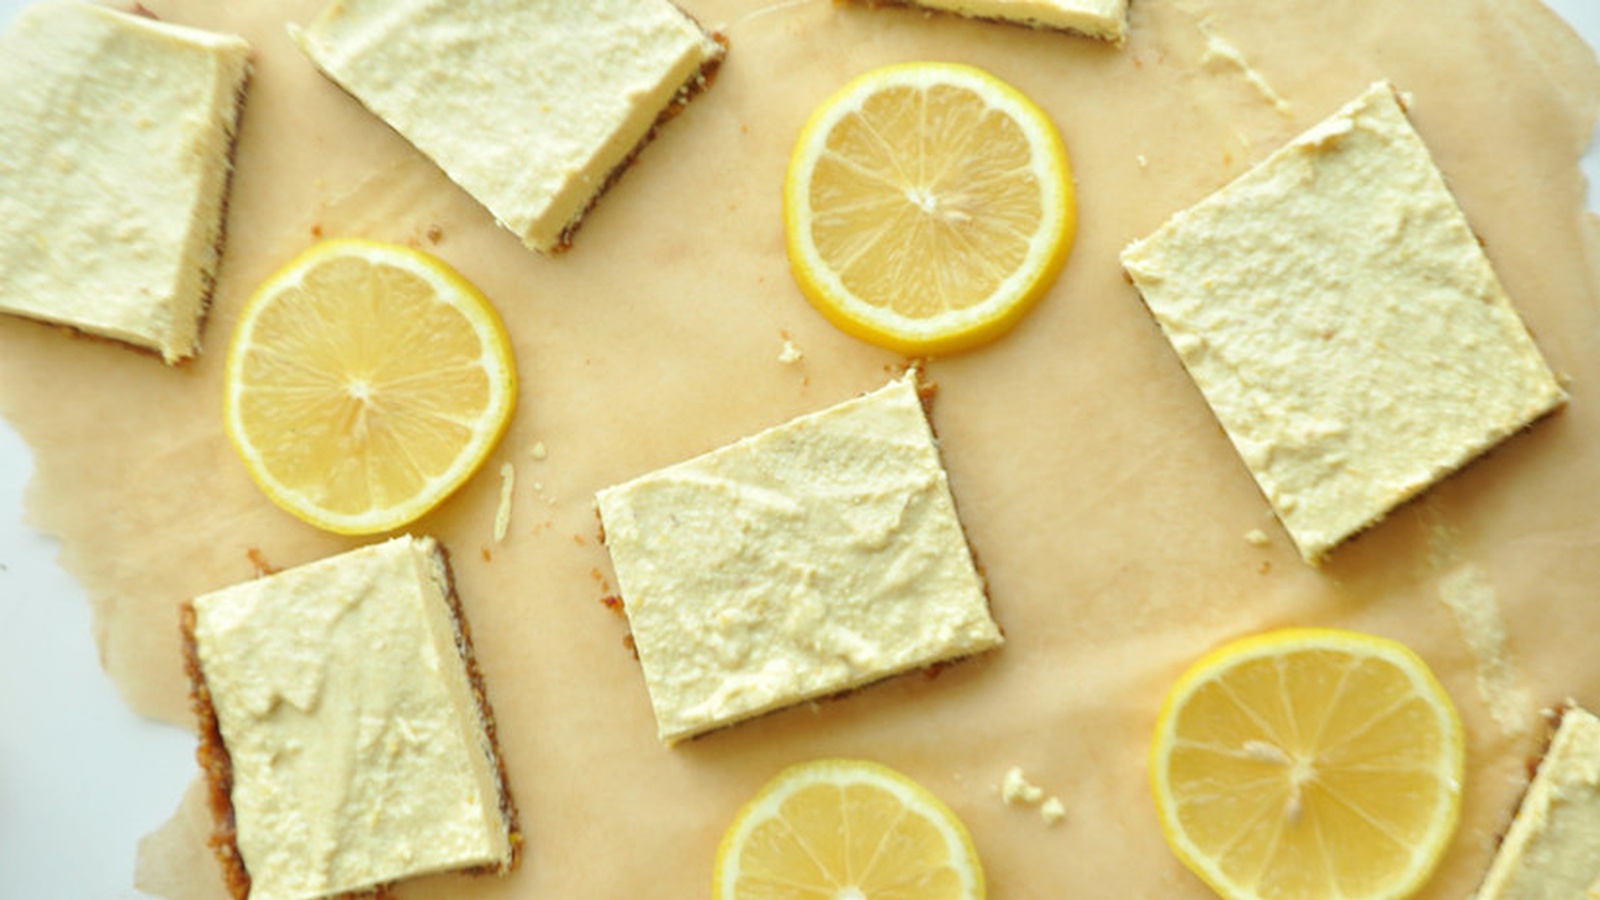 Sweet and Zesty Raw Lemon Bars Filled With Antioxidants, Fiber, and Healthy Fats (Recipe)